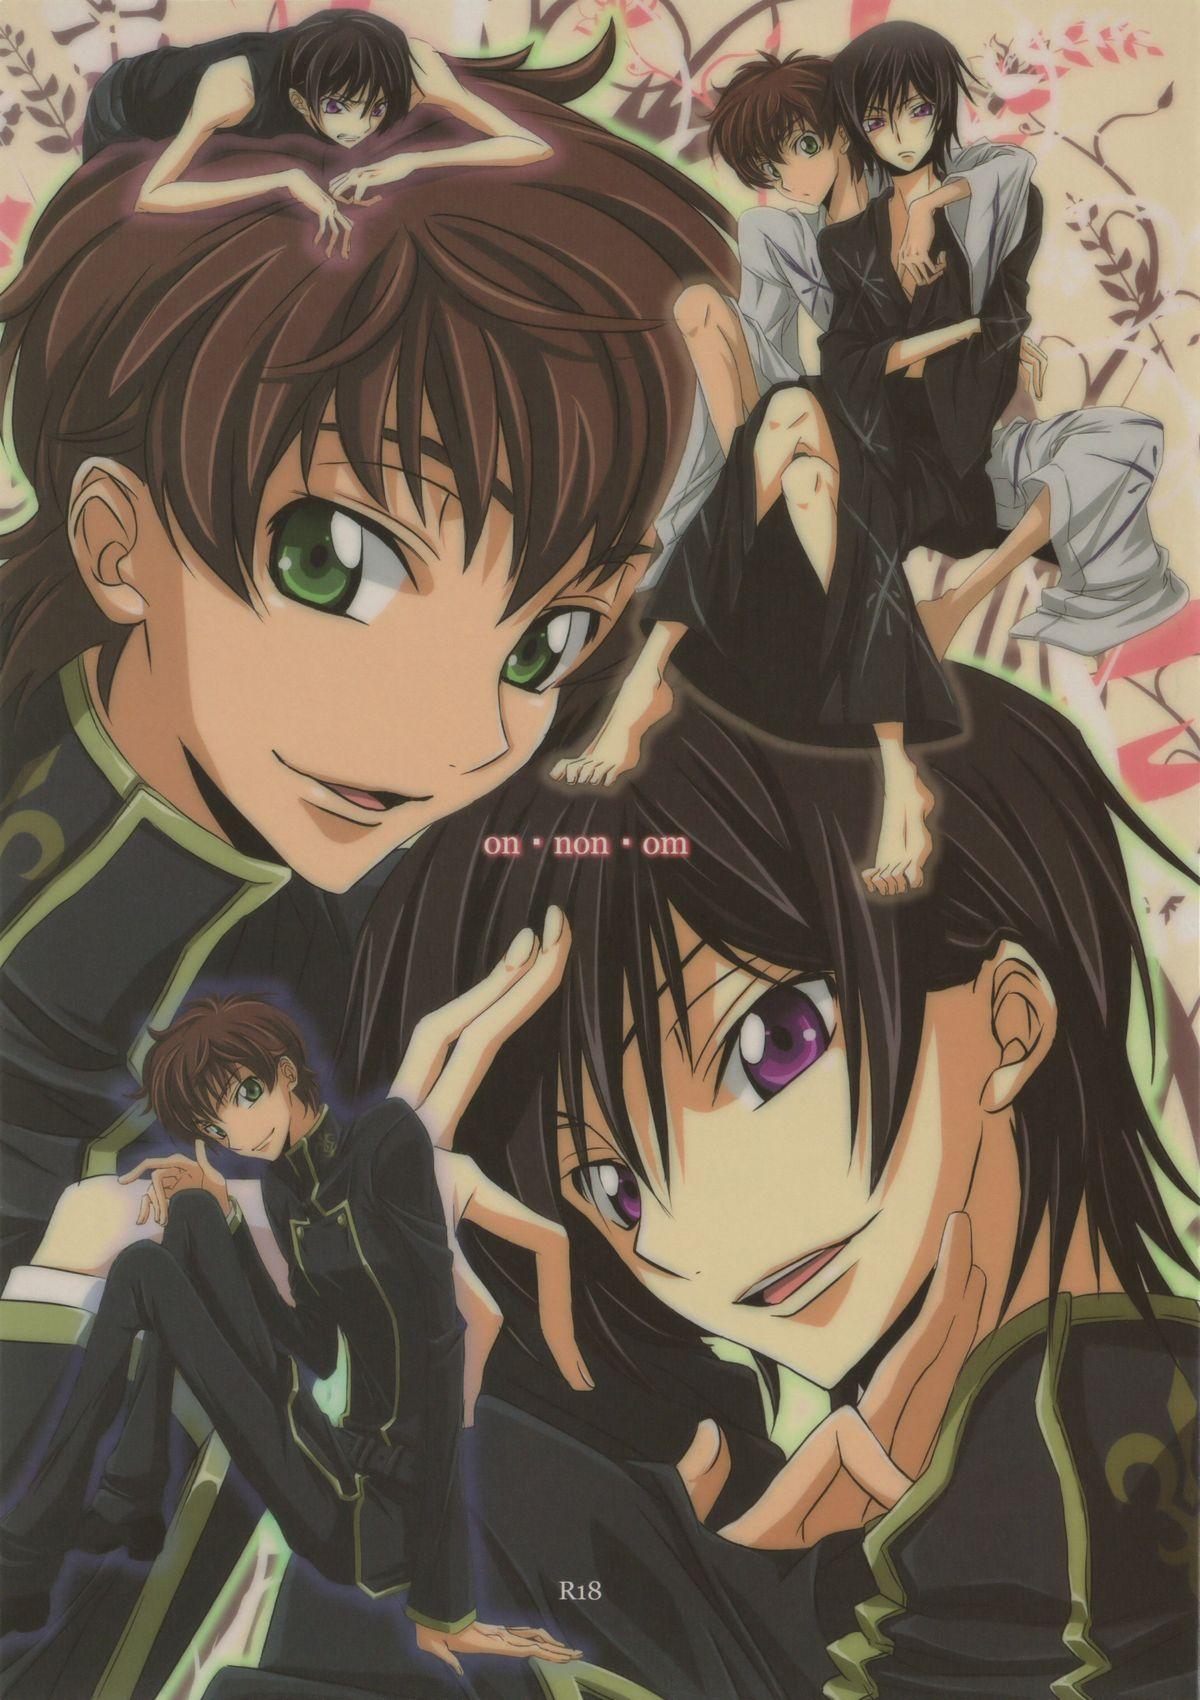 Hot Cunt on・non・om - Code geass Wrestling - Picture 1